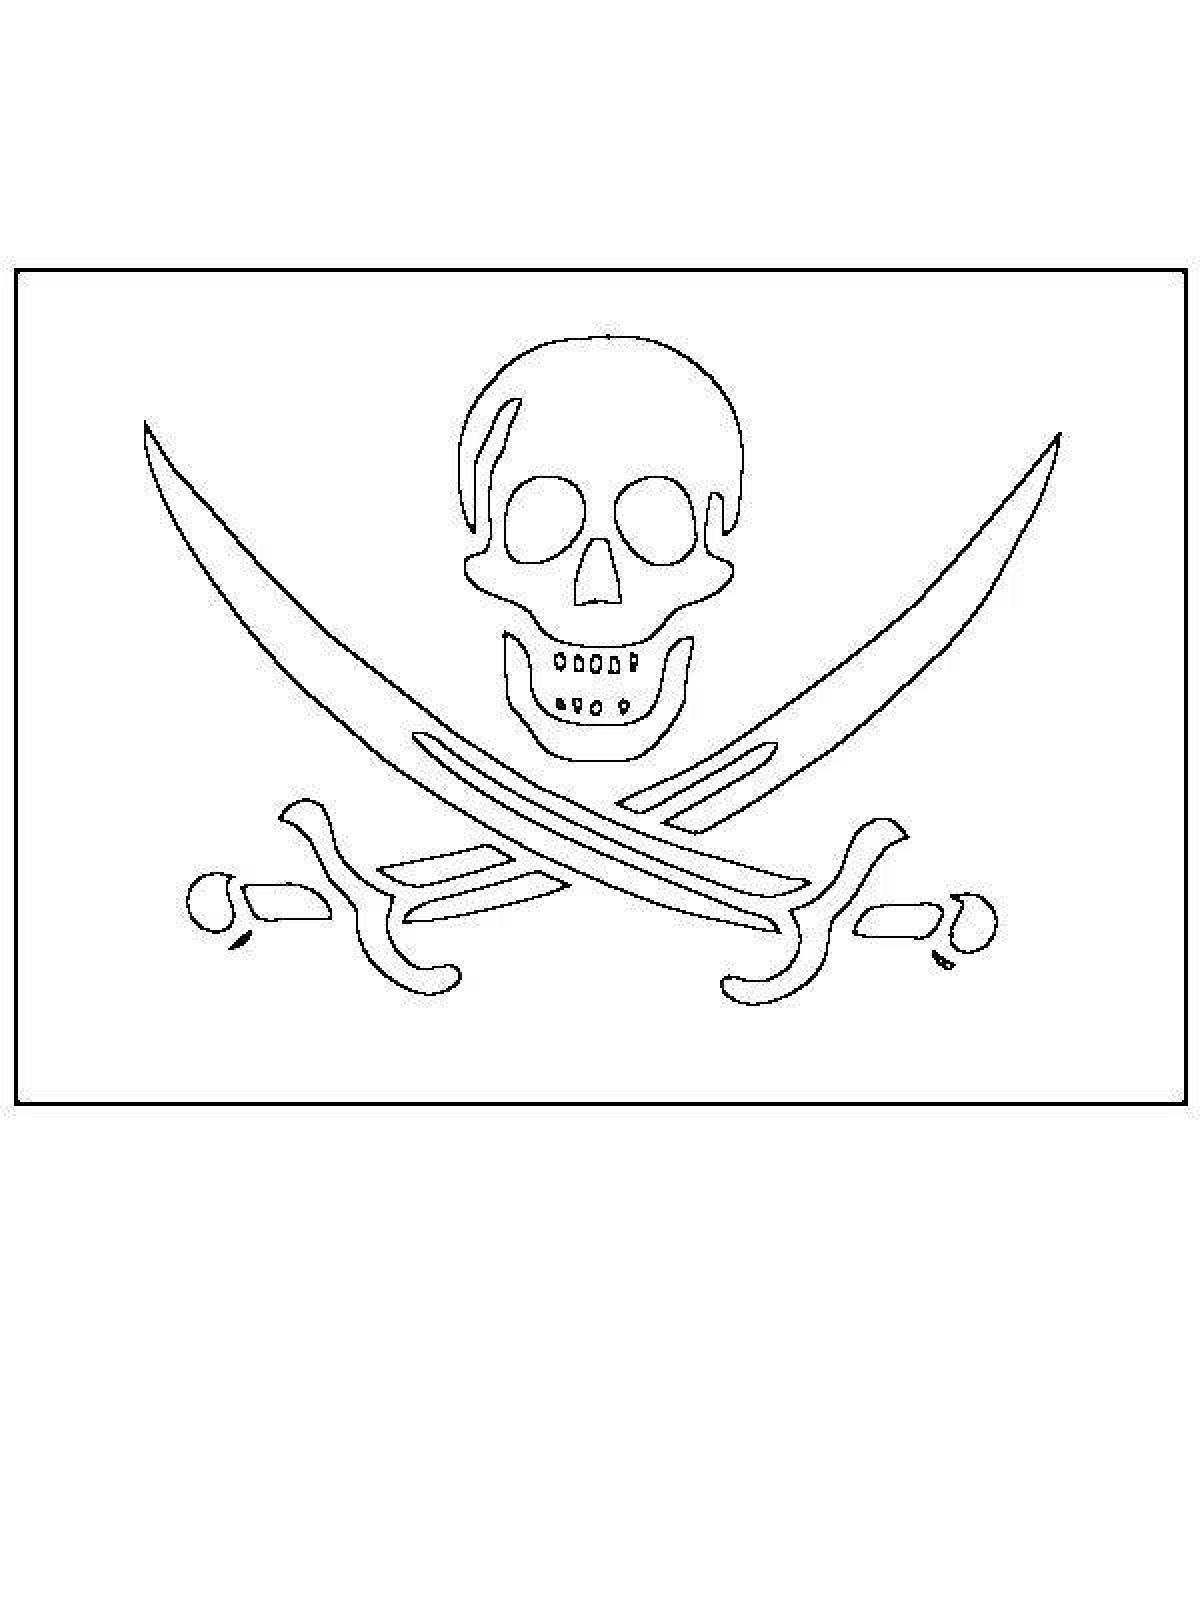 Coloring page jolly roger is amazing